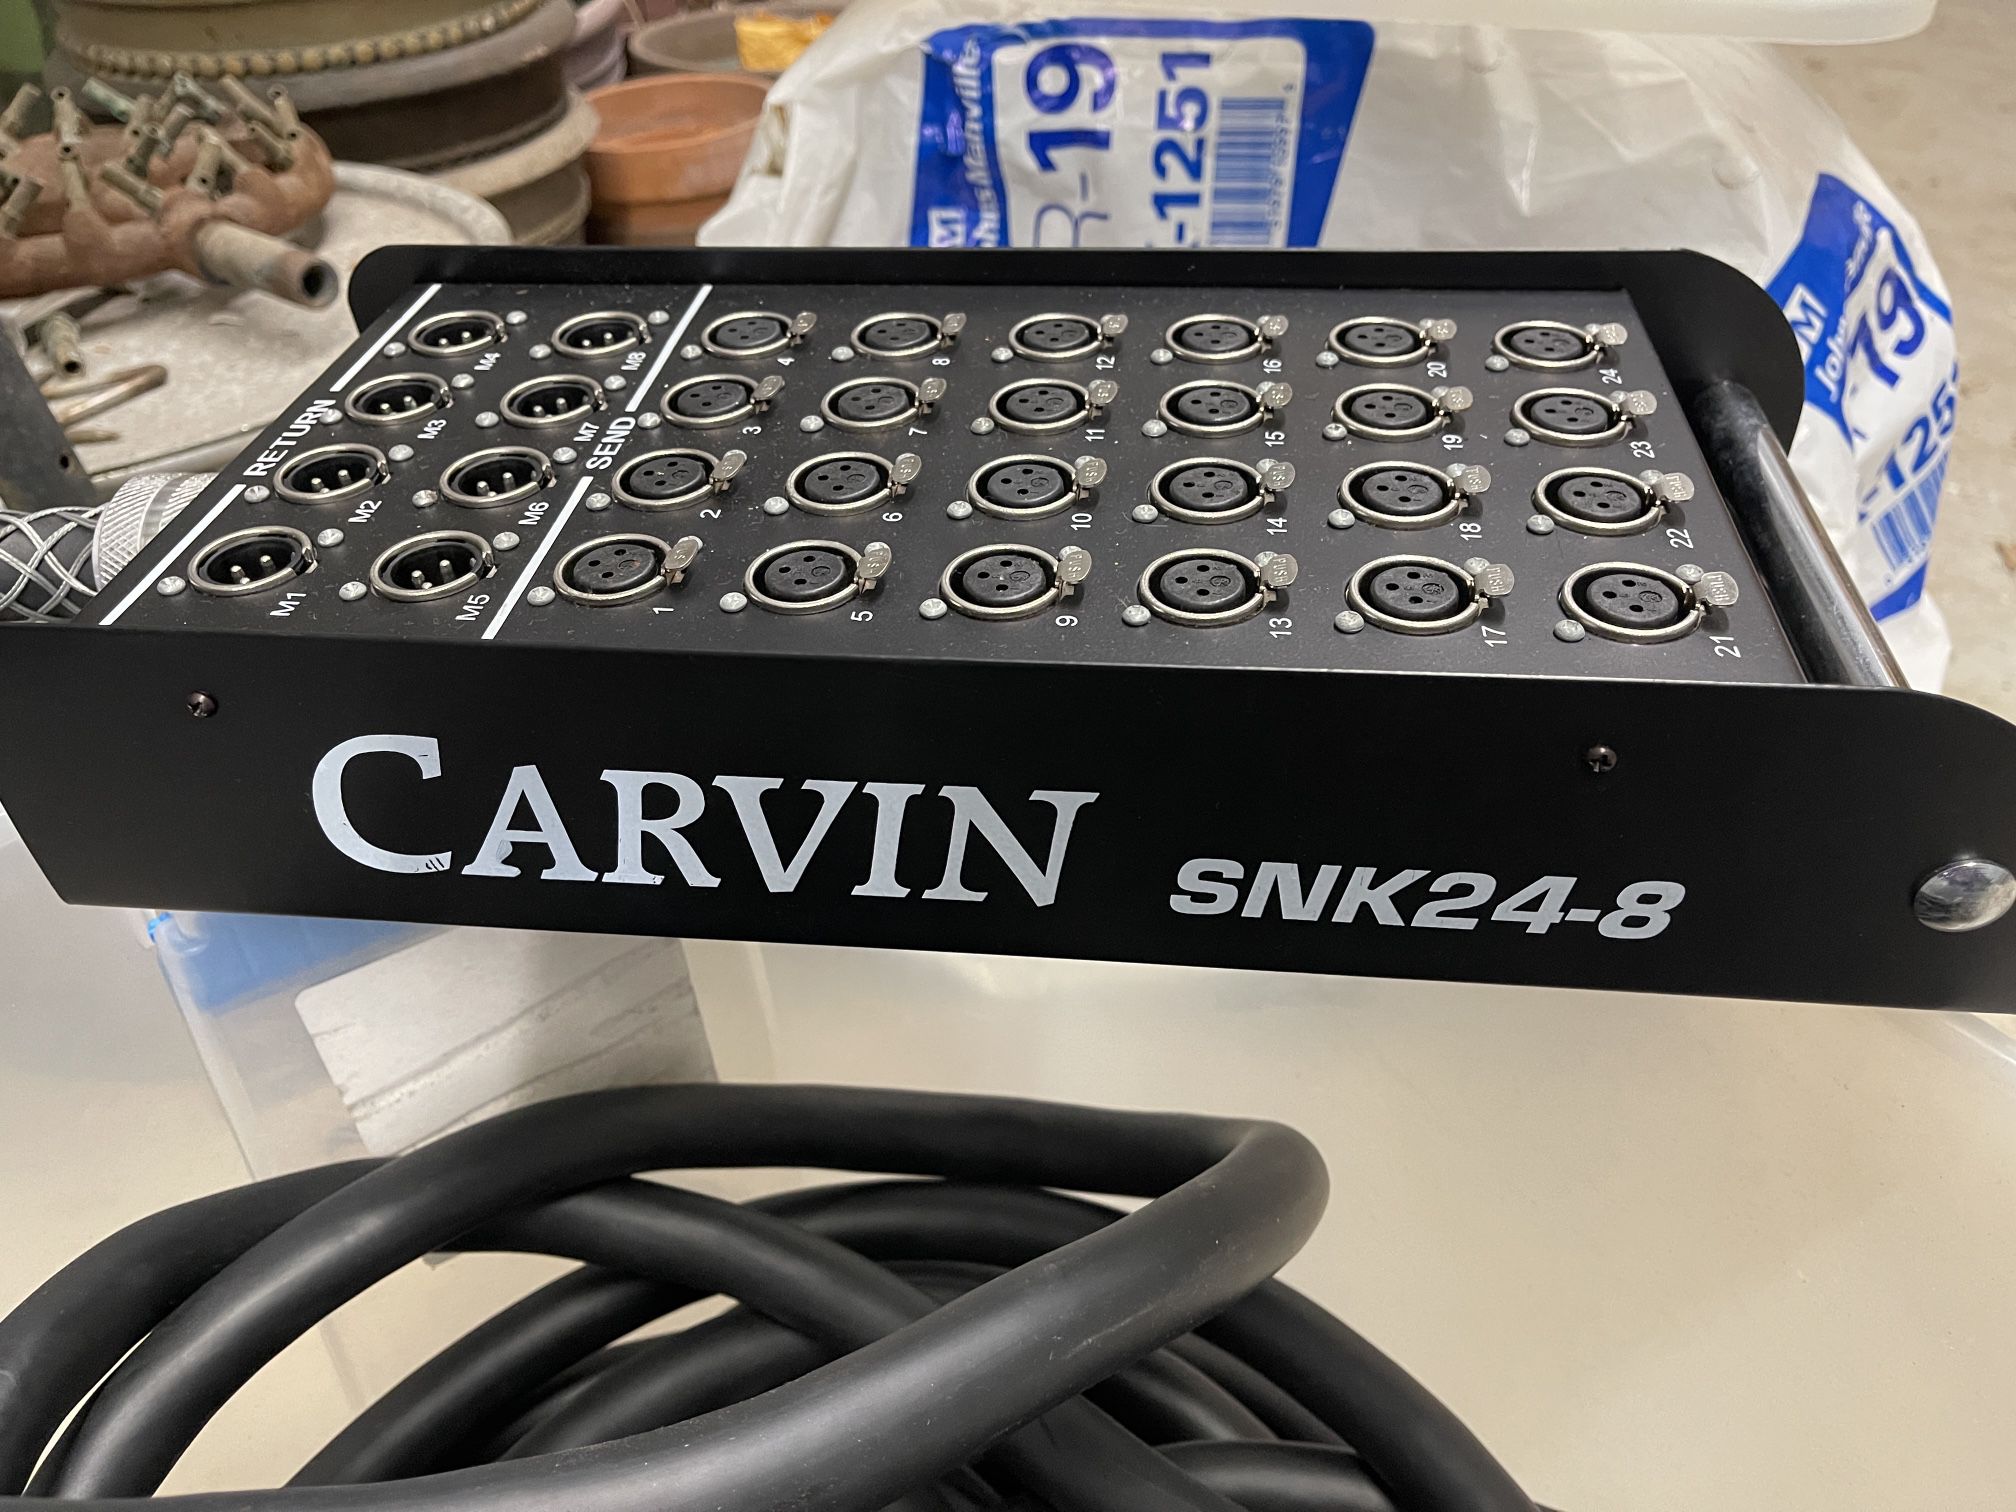 Carvin SNK24-8 Audio Cable